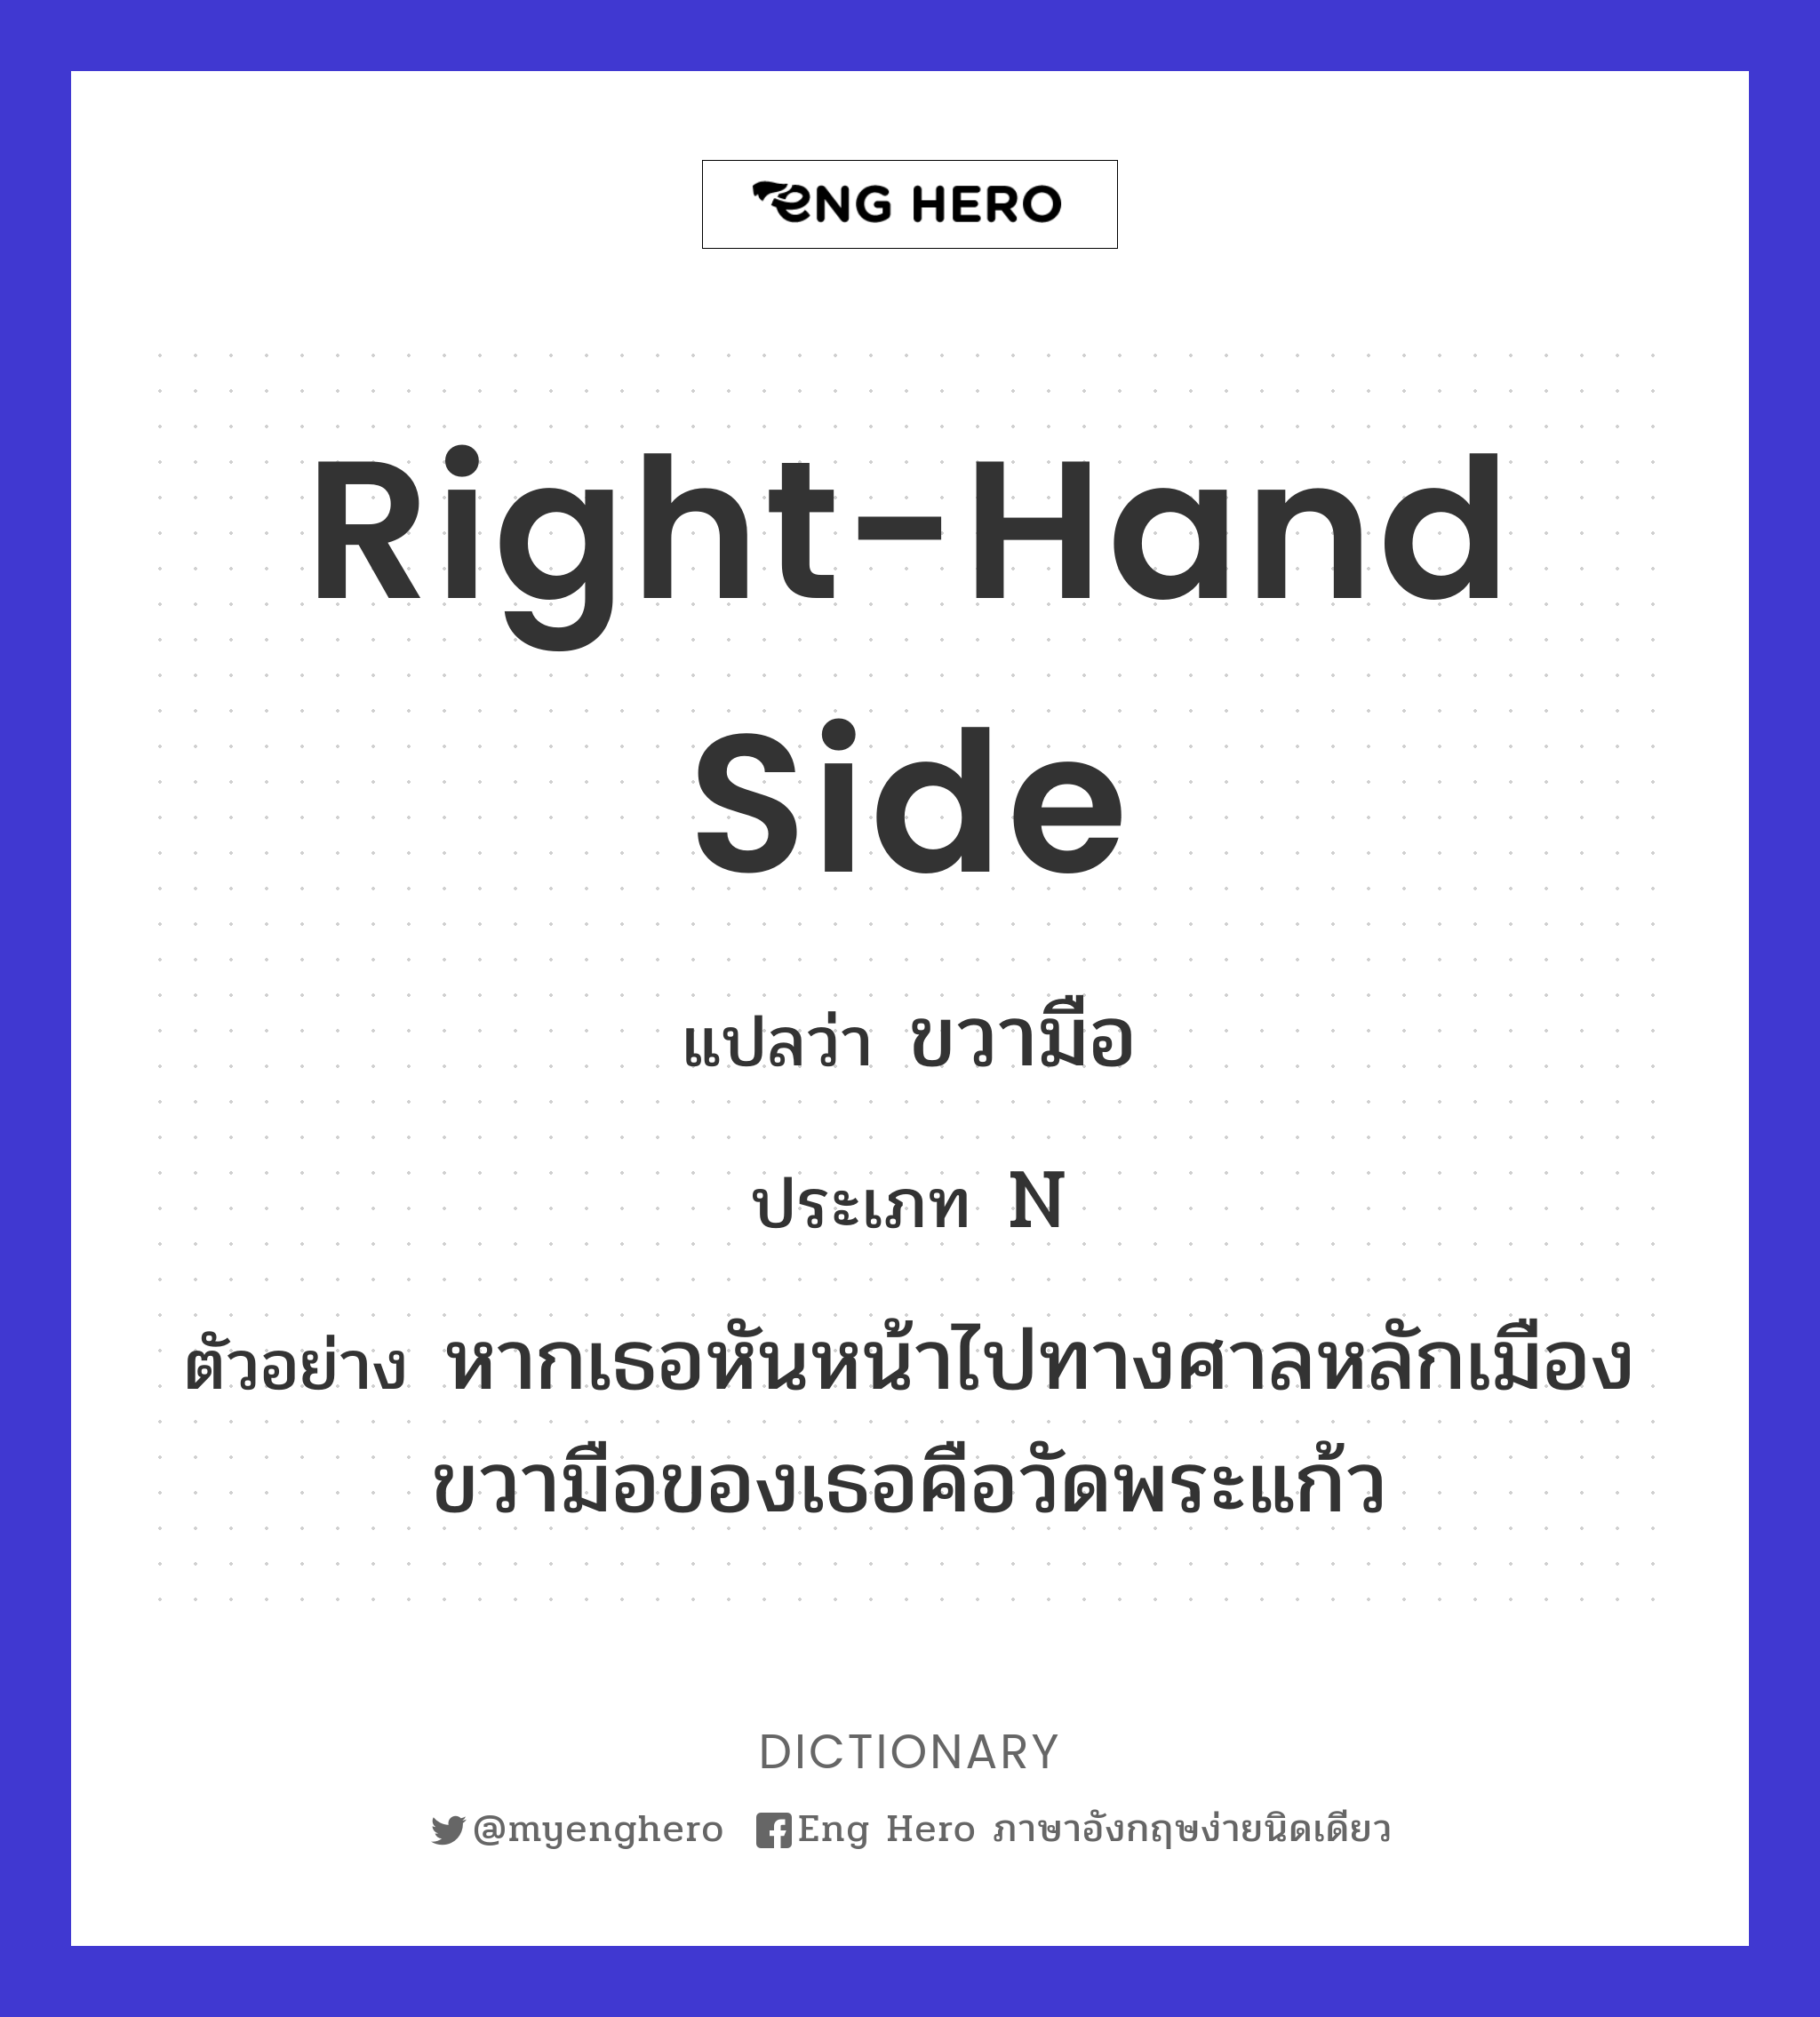 right-hand side